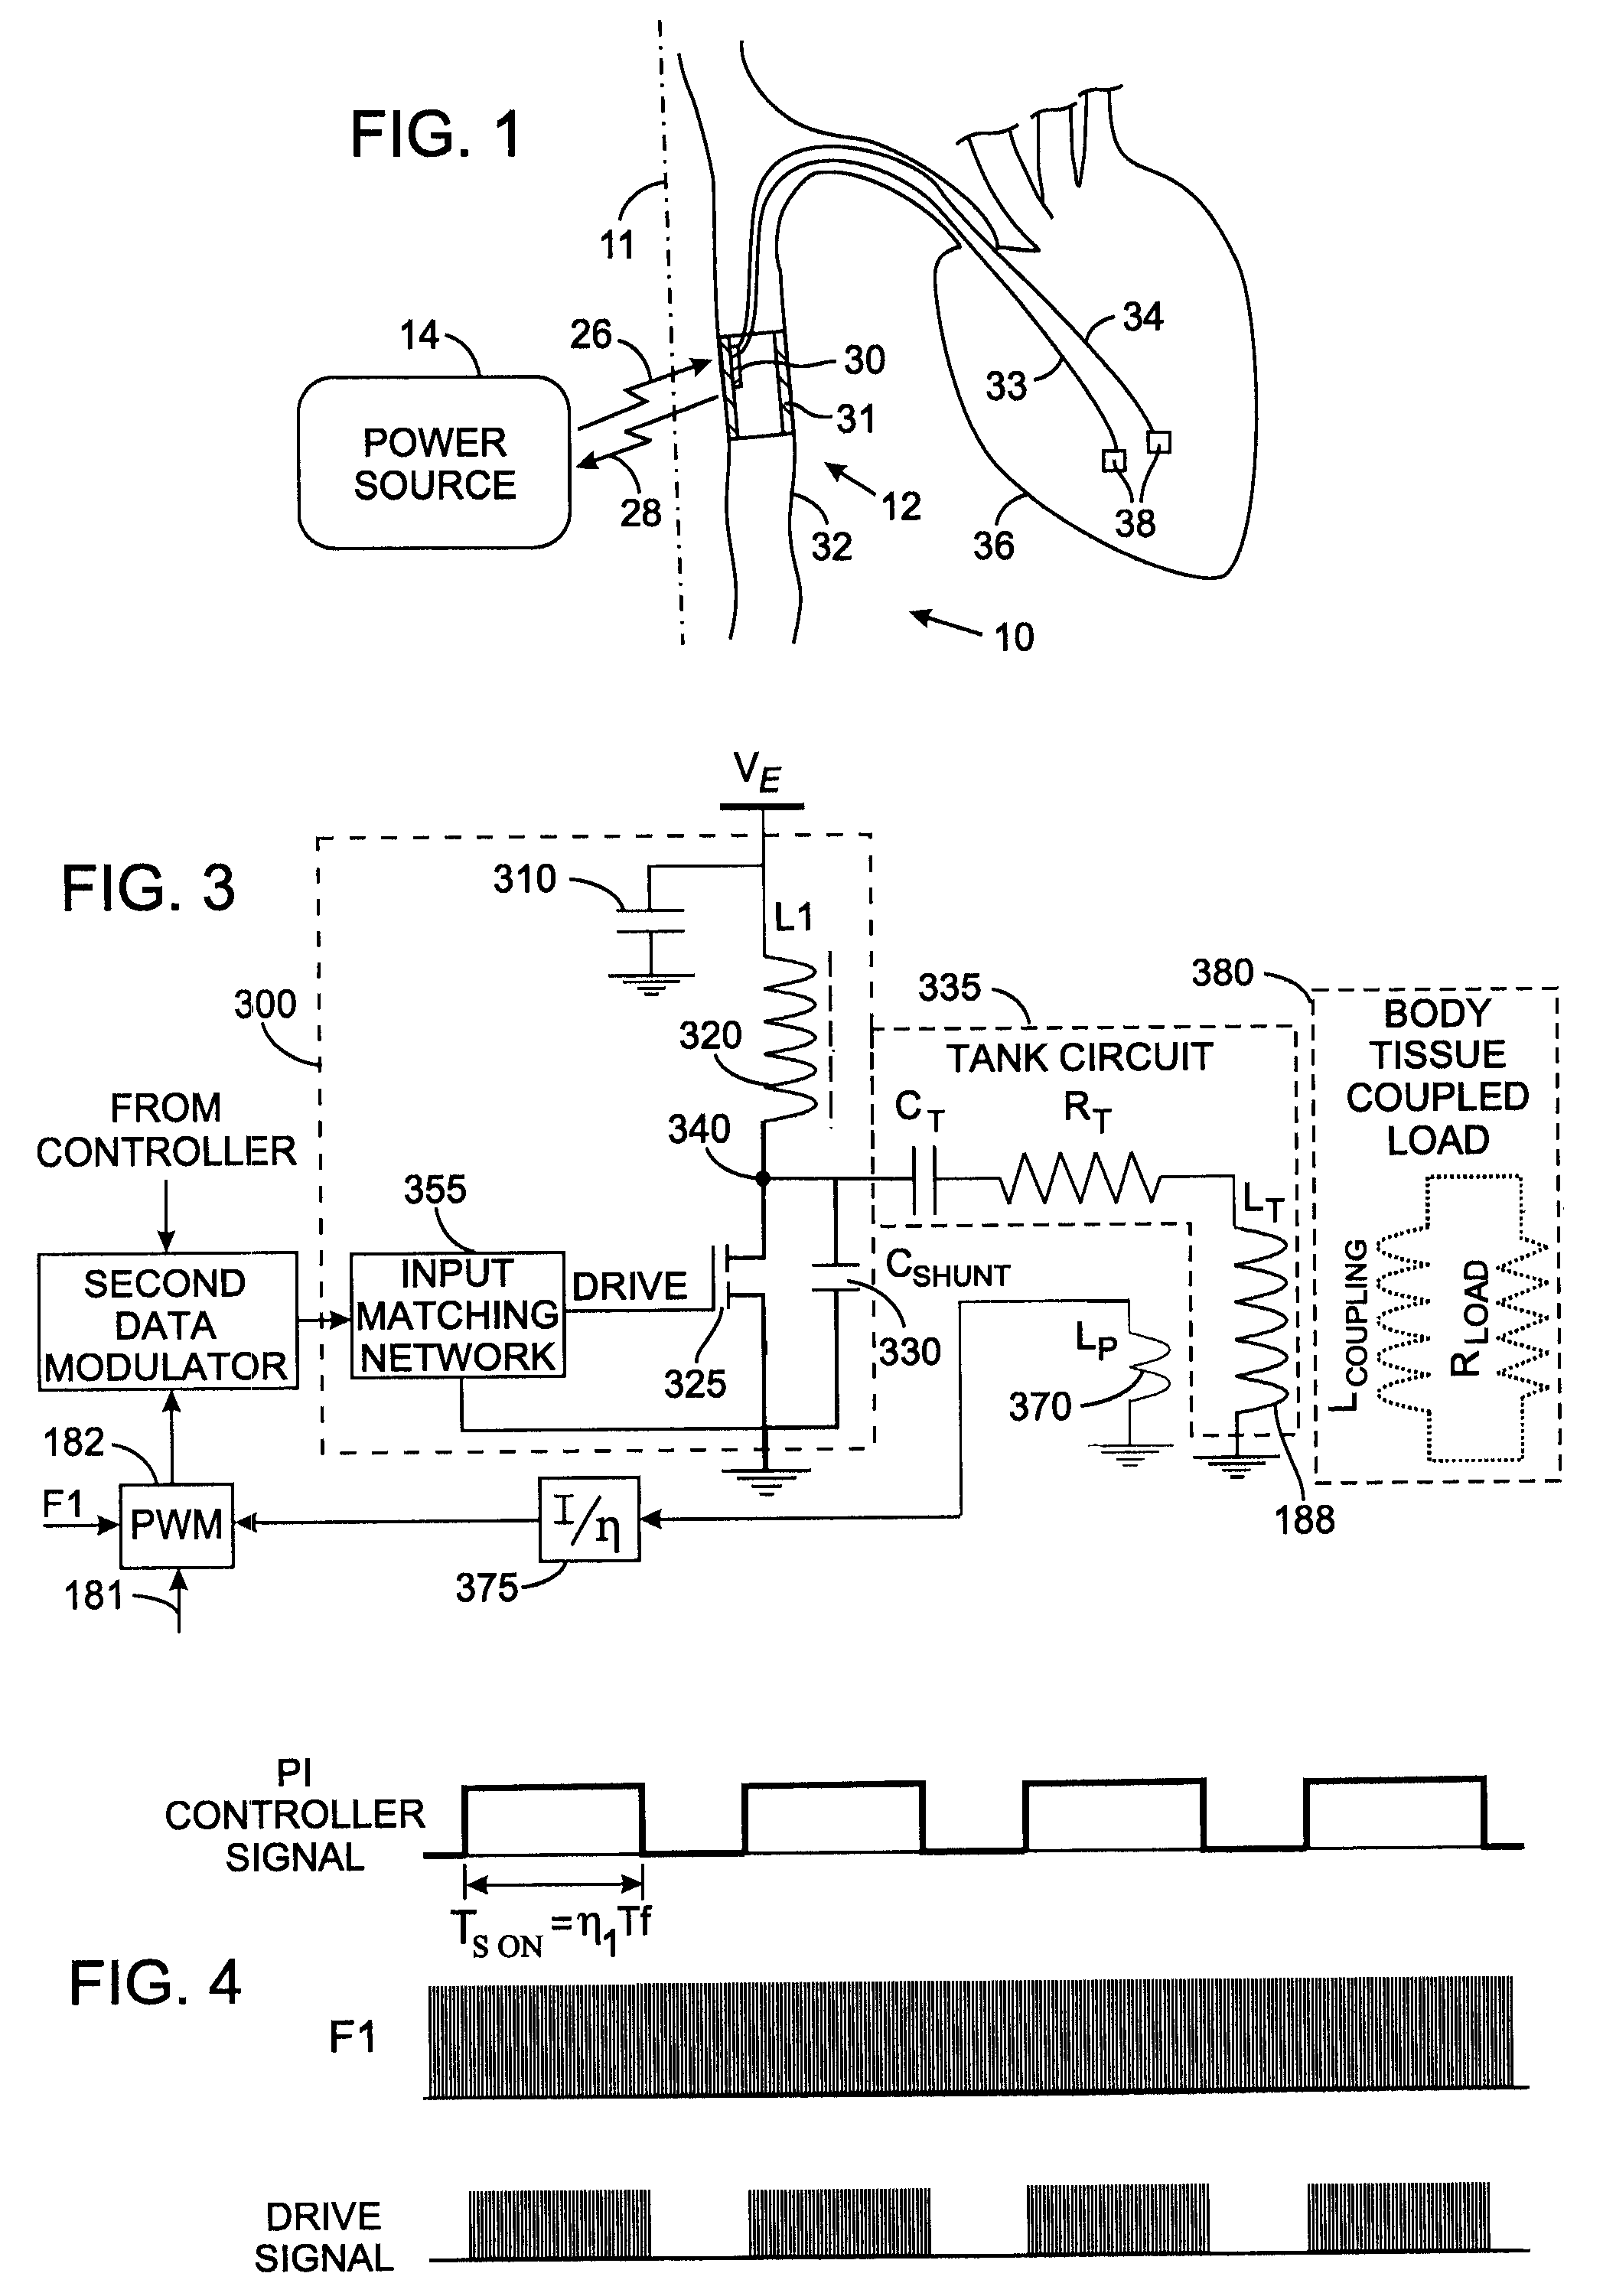 Class-e radio frequency amplifier for use with an implantable medical device